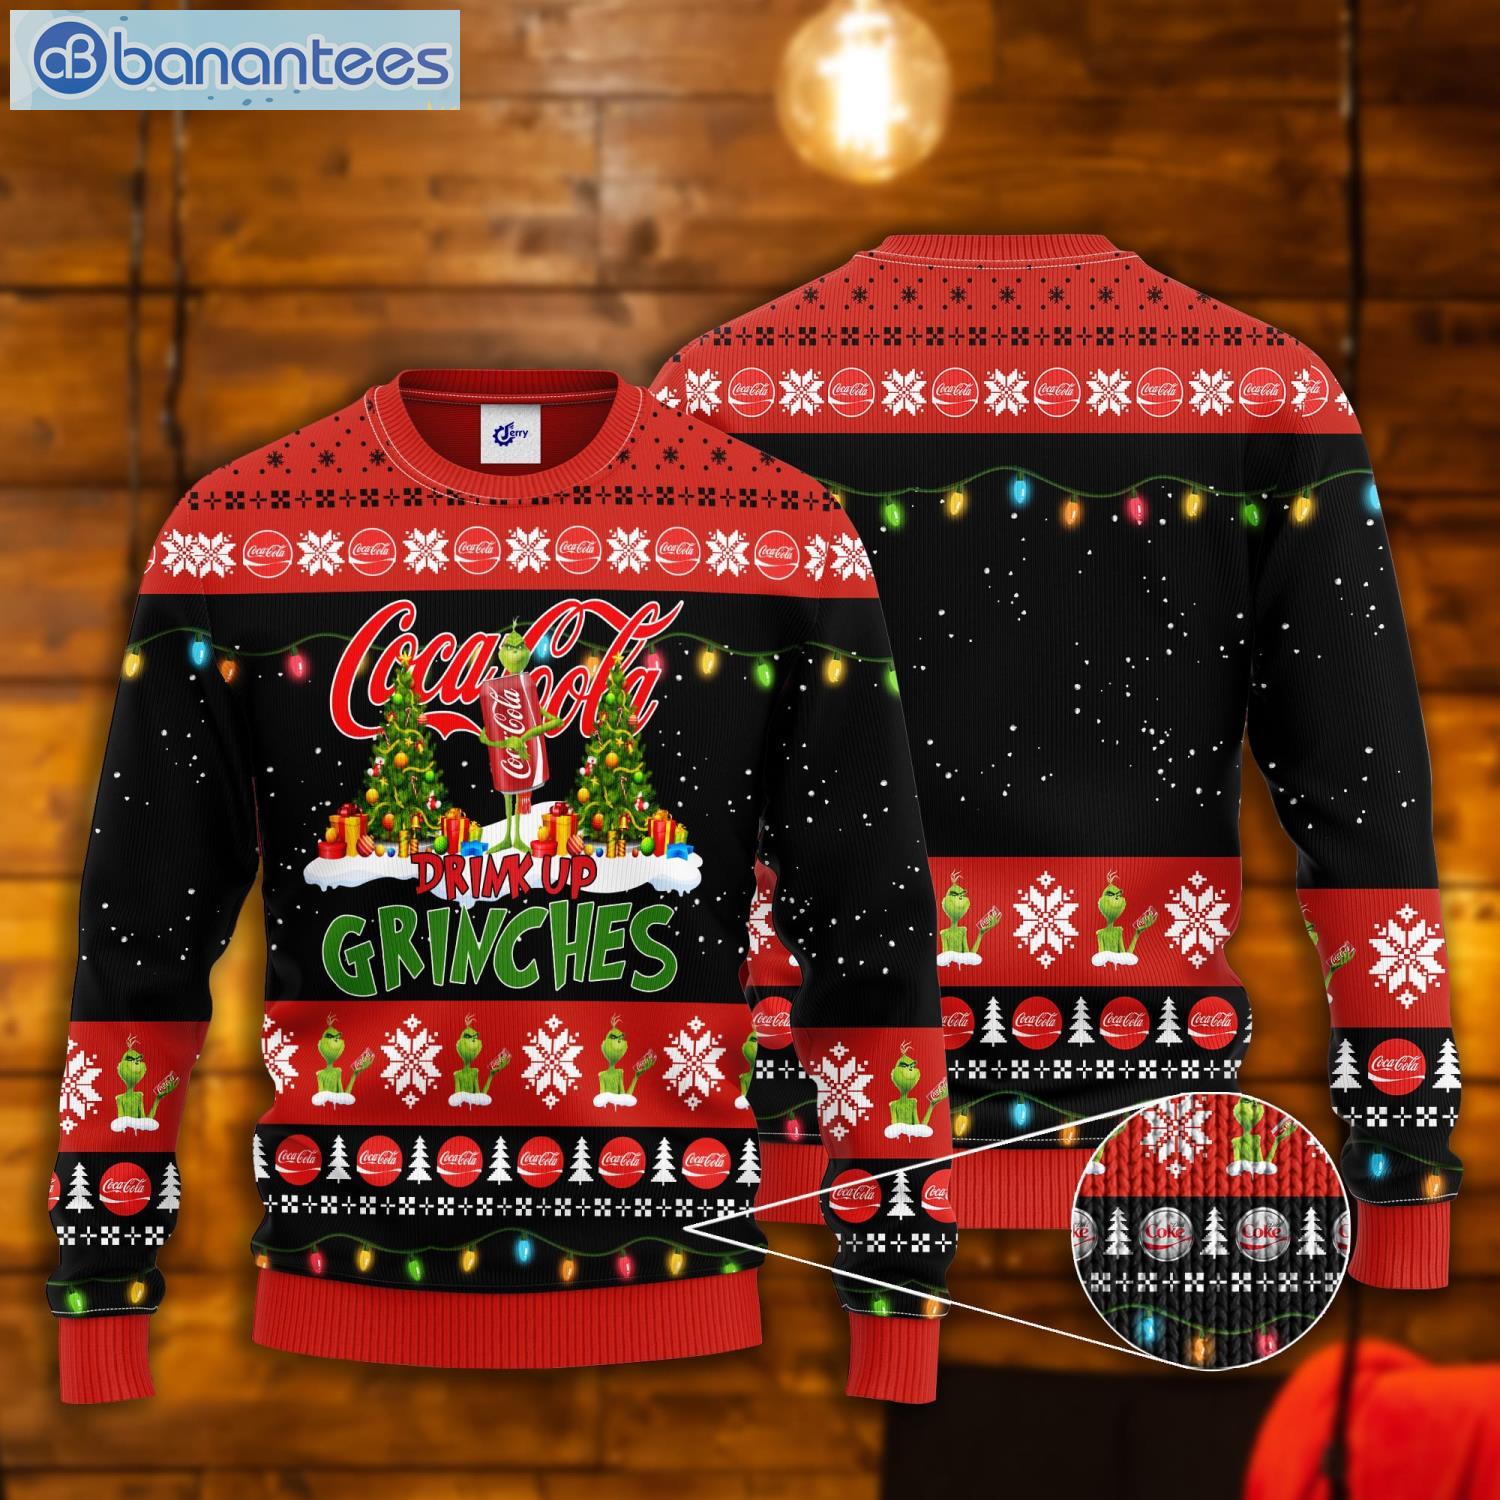 Coca Cola Drink Up Grinches Ugly Christmas Sweater Product Photo 1